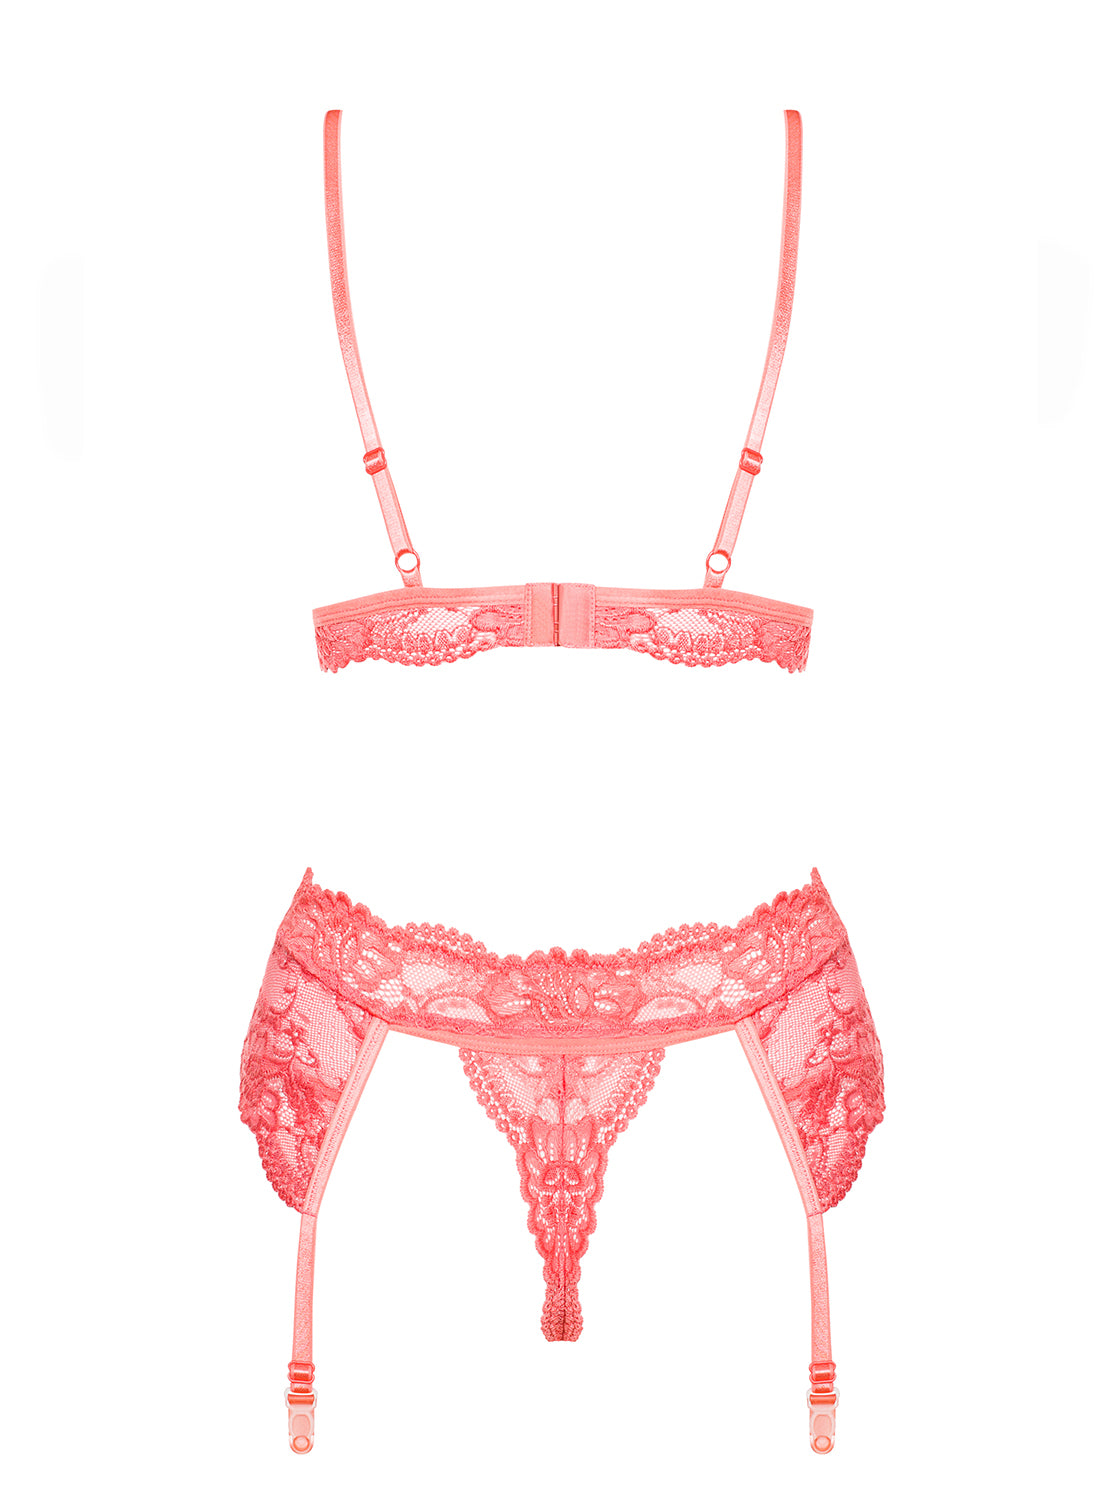 Seductive set with lace decoration consisting of bra, garter belt and thong